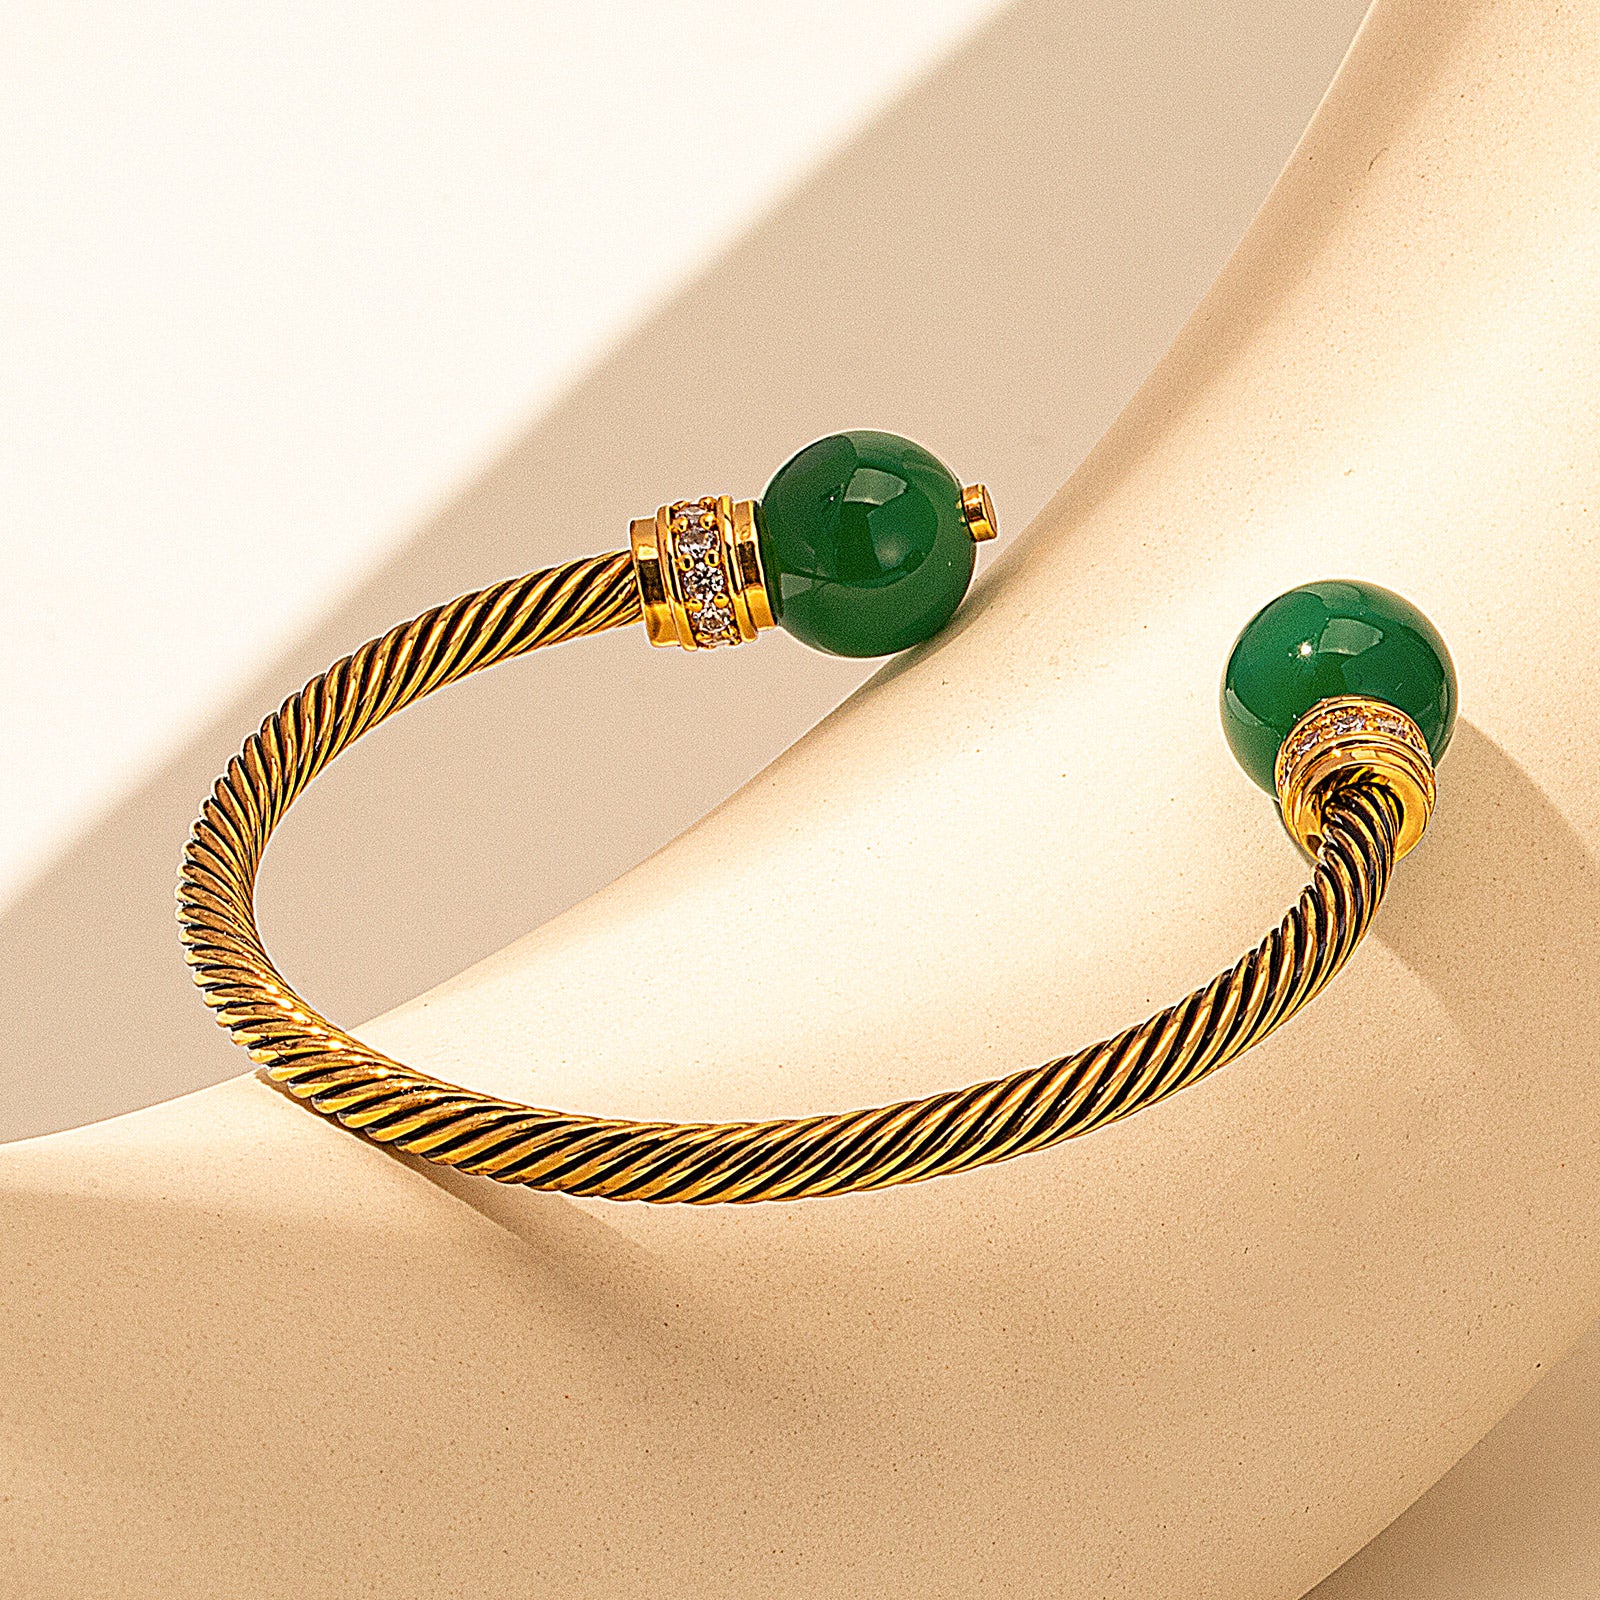 Vintage Agate Bracelet, sculpted to perfection with gold details, this bracelet showcases the opulence of green agate gemstones, making it a statement piece for any occasion.